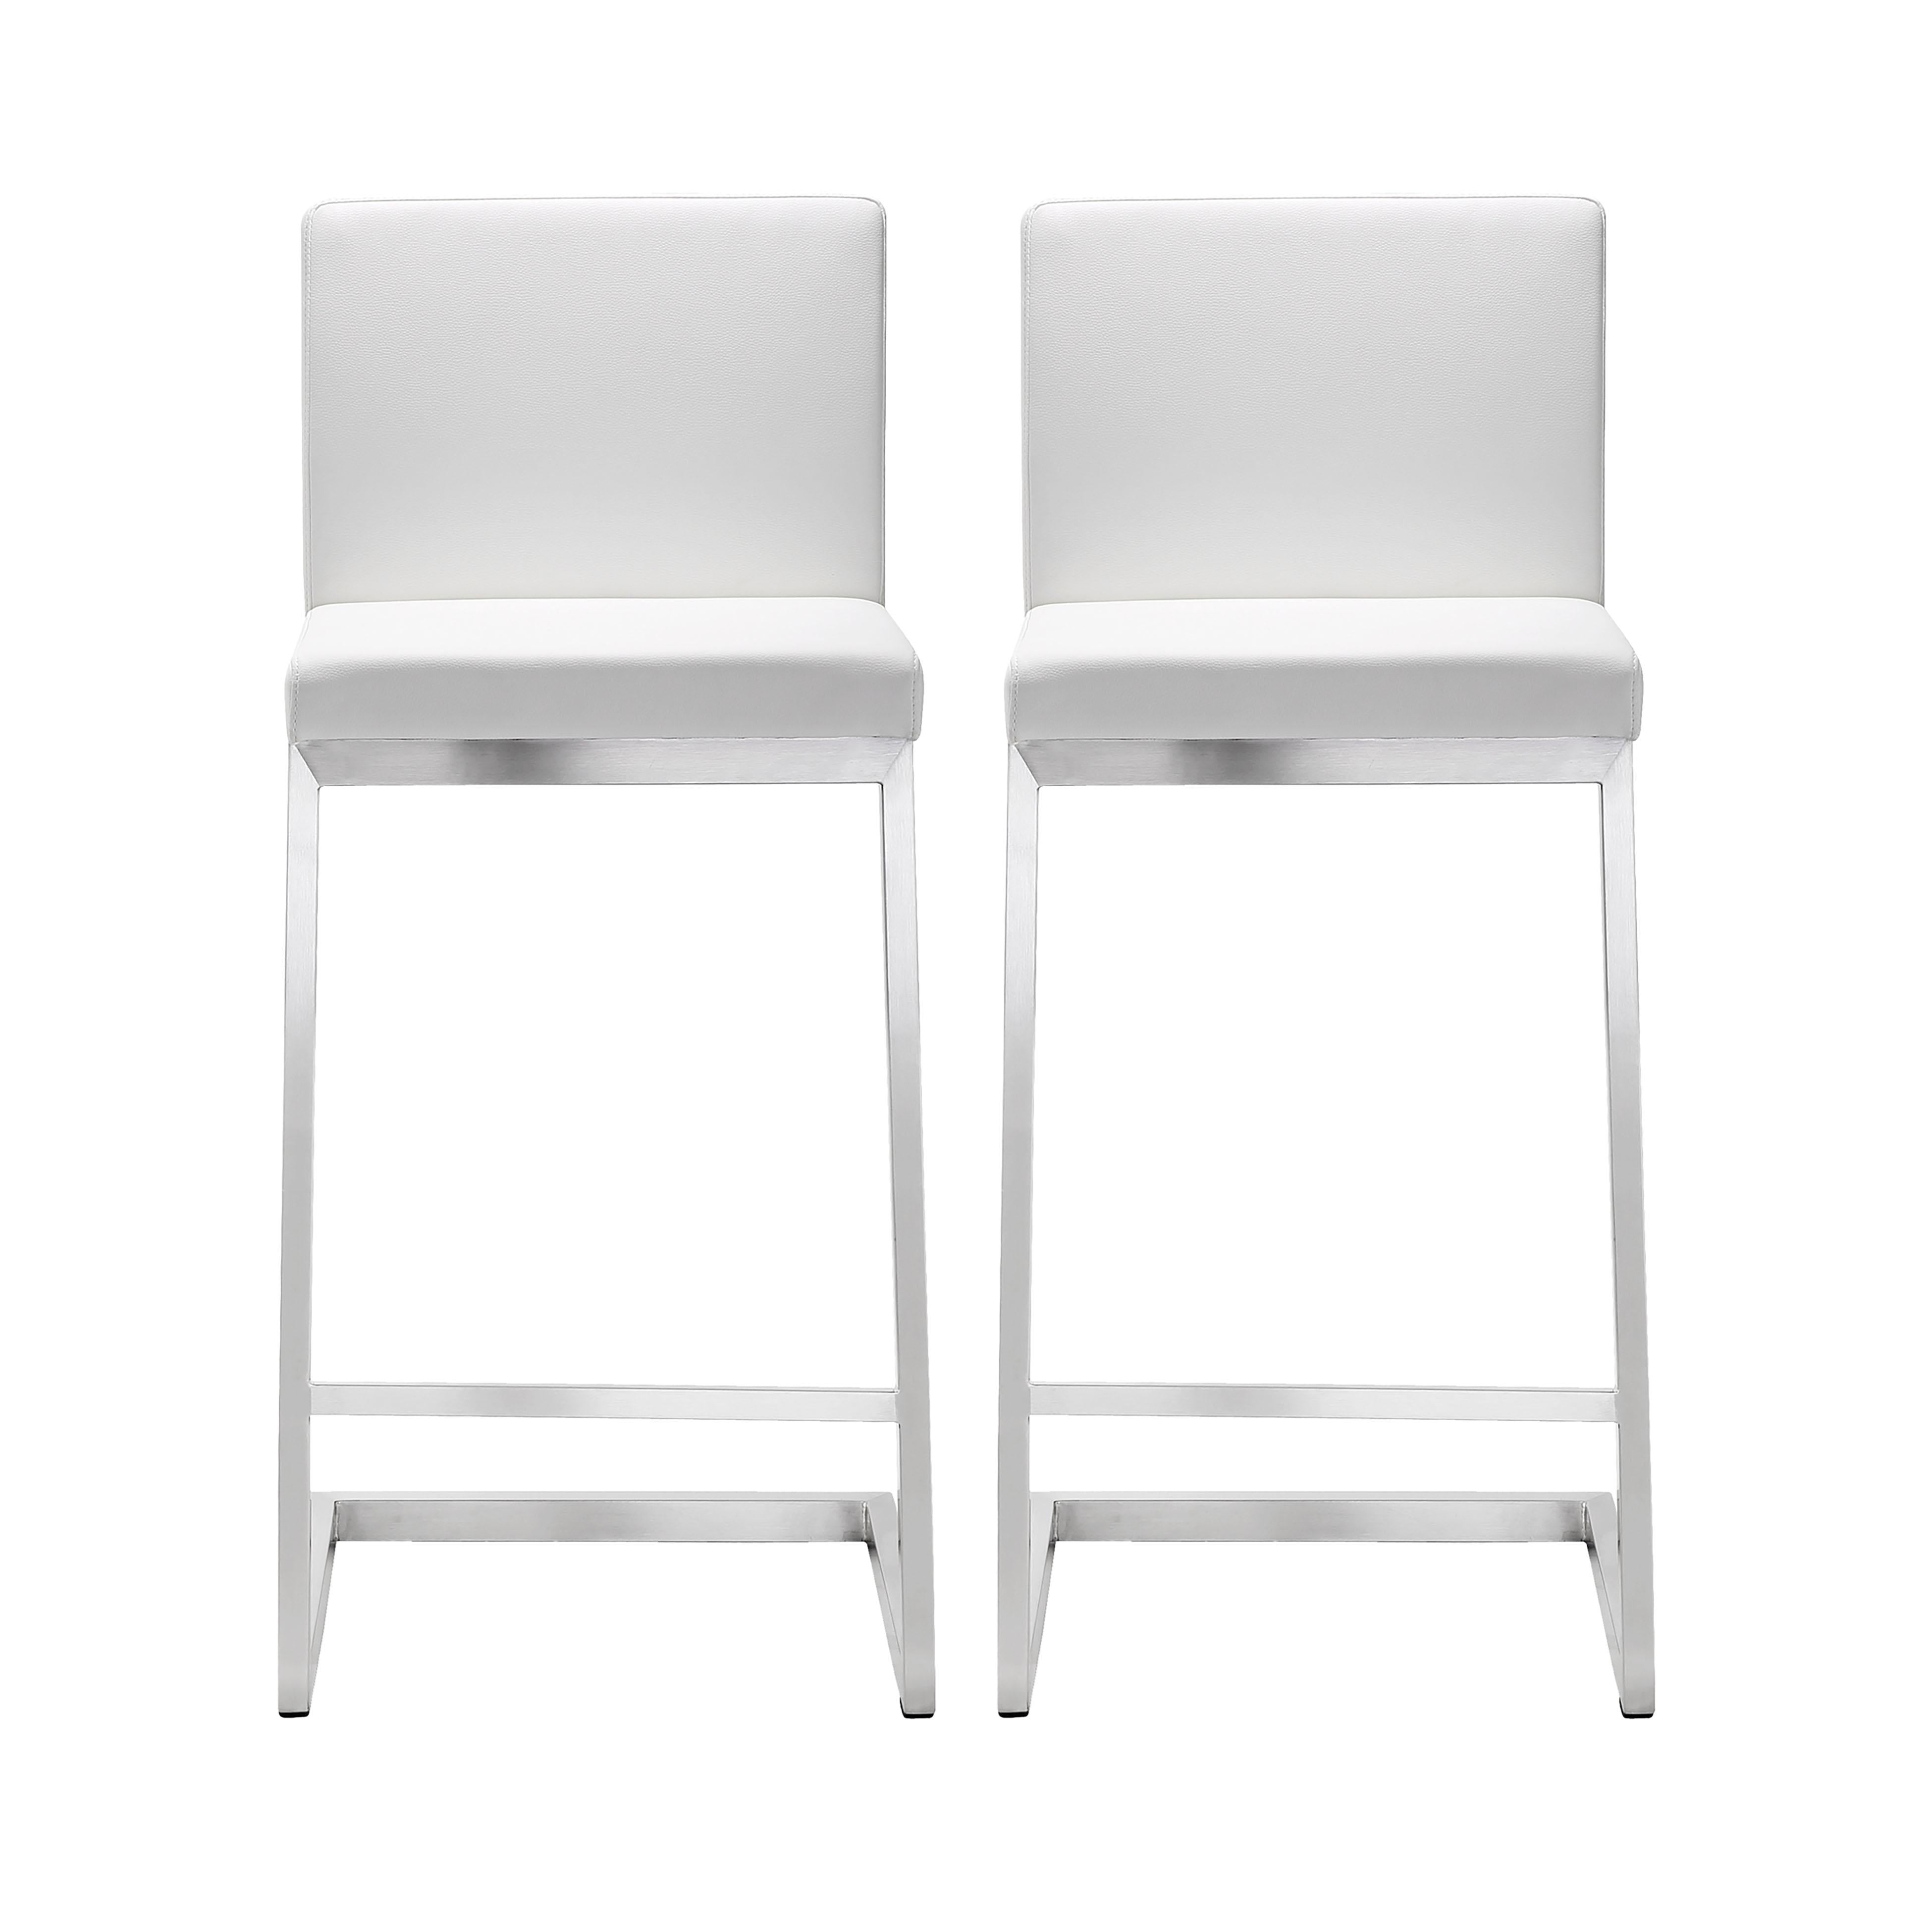 Tov Furniture Stools - Parma White Stainless Steel Counter Stool - Set of 2